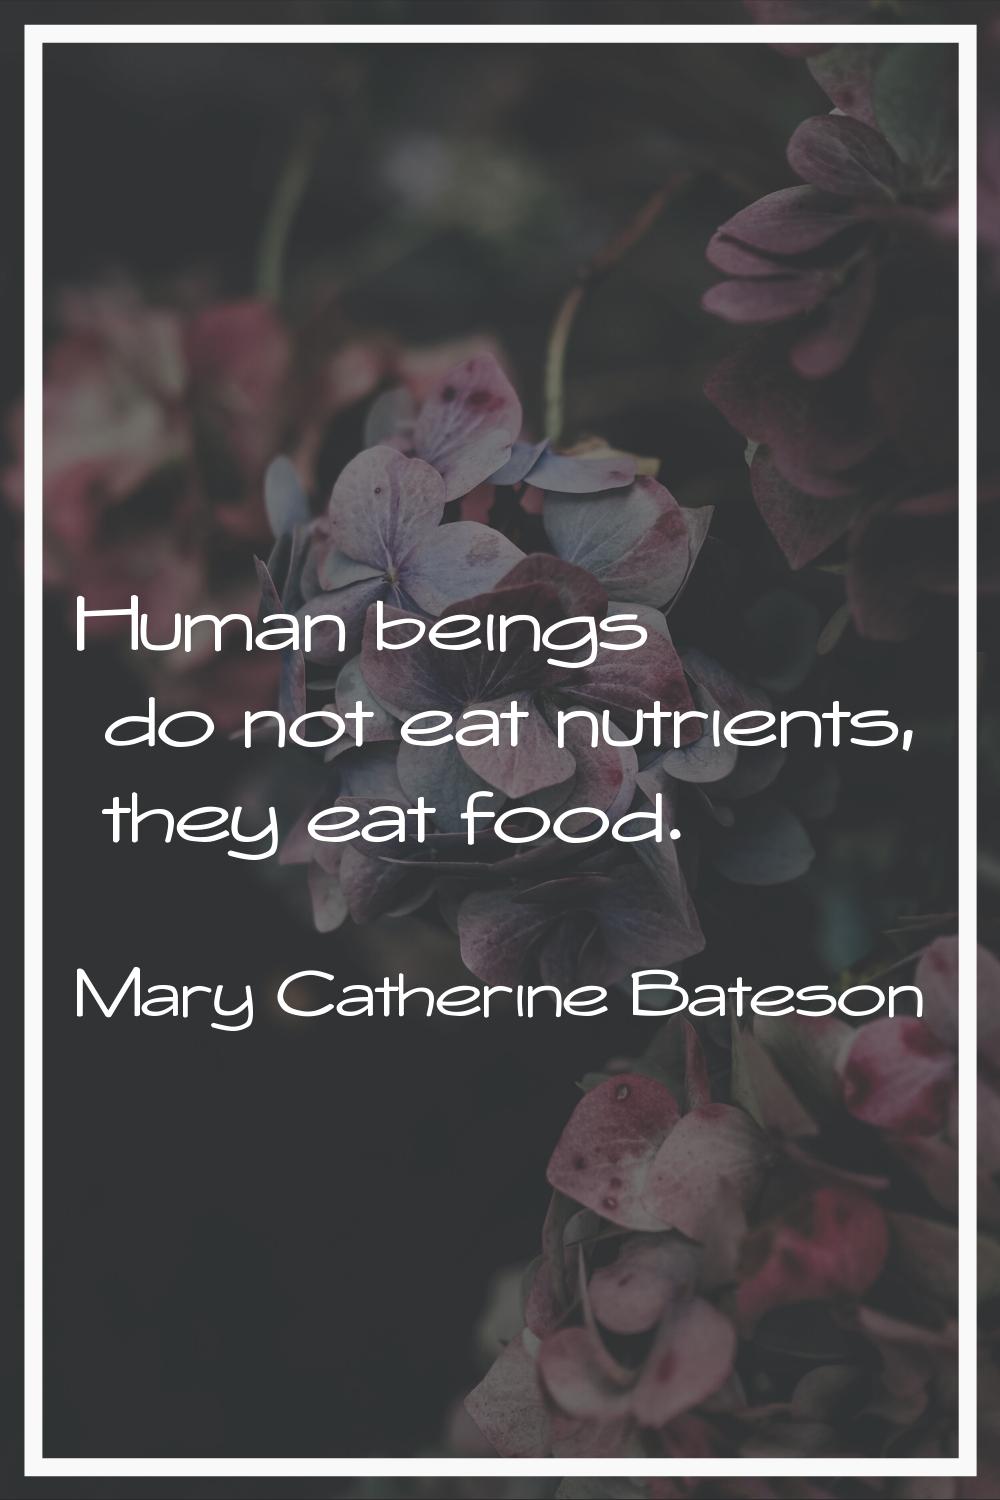 Human beings do not eat nutrients, they eat food.